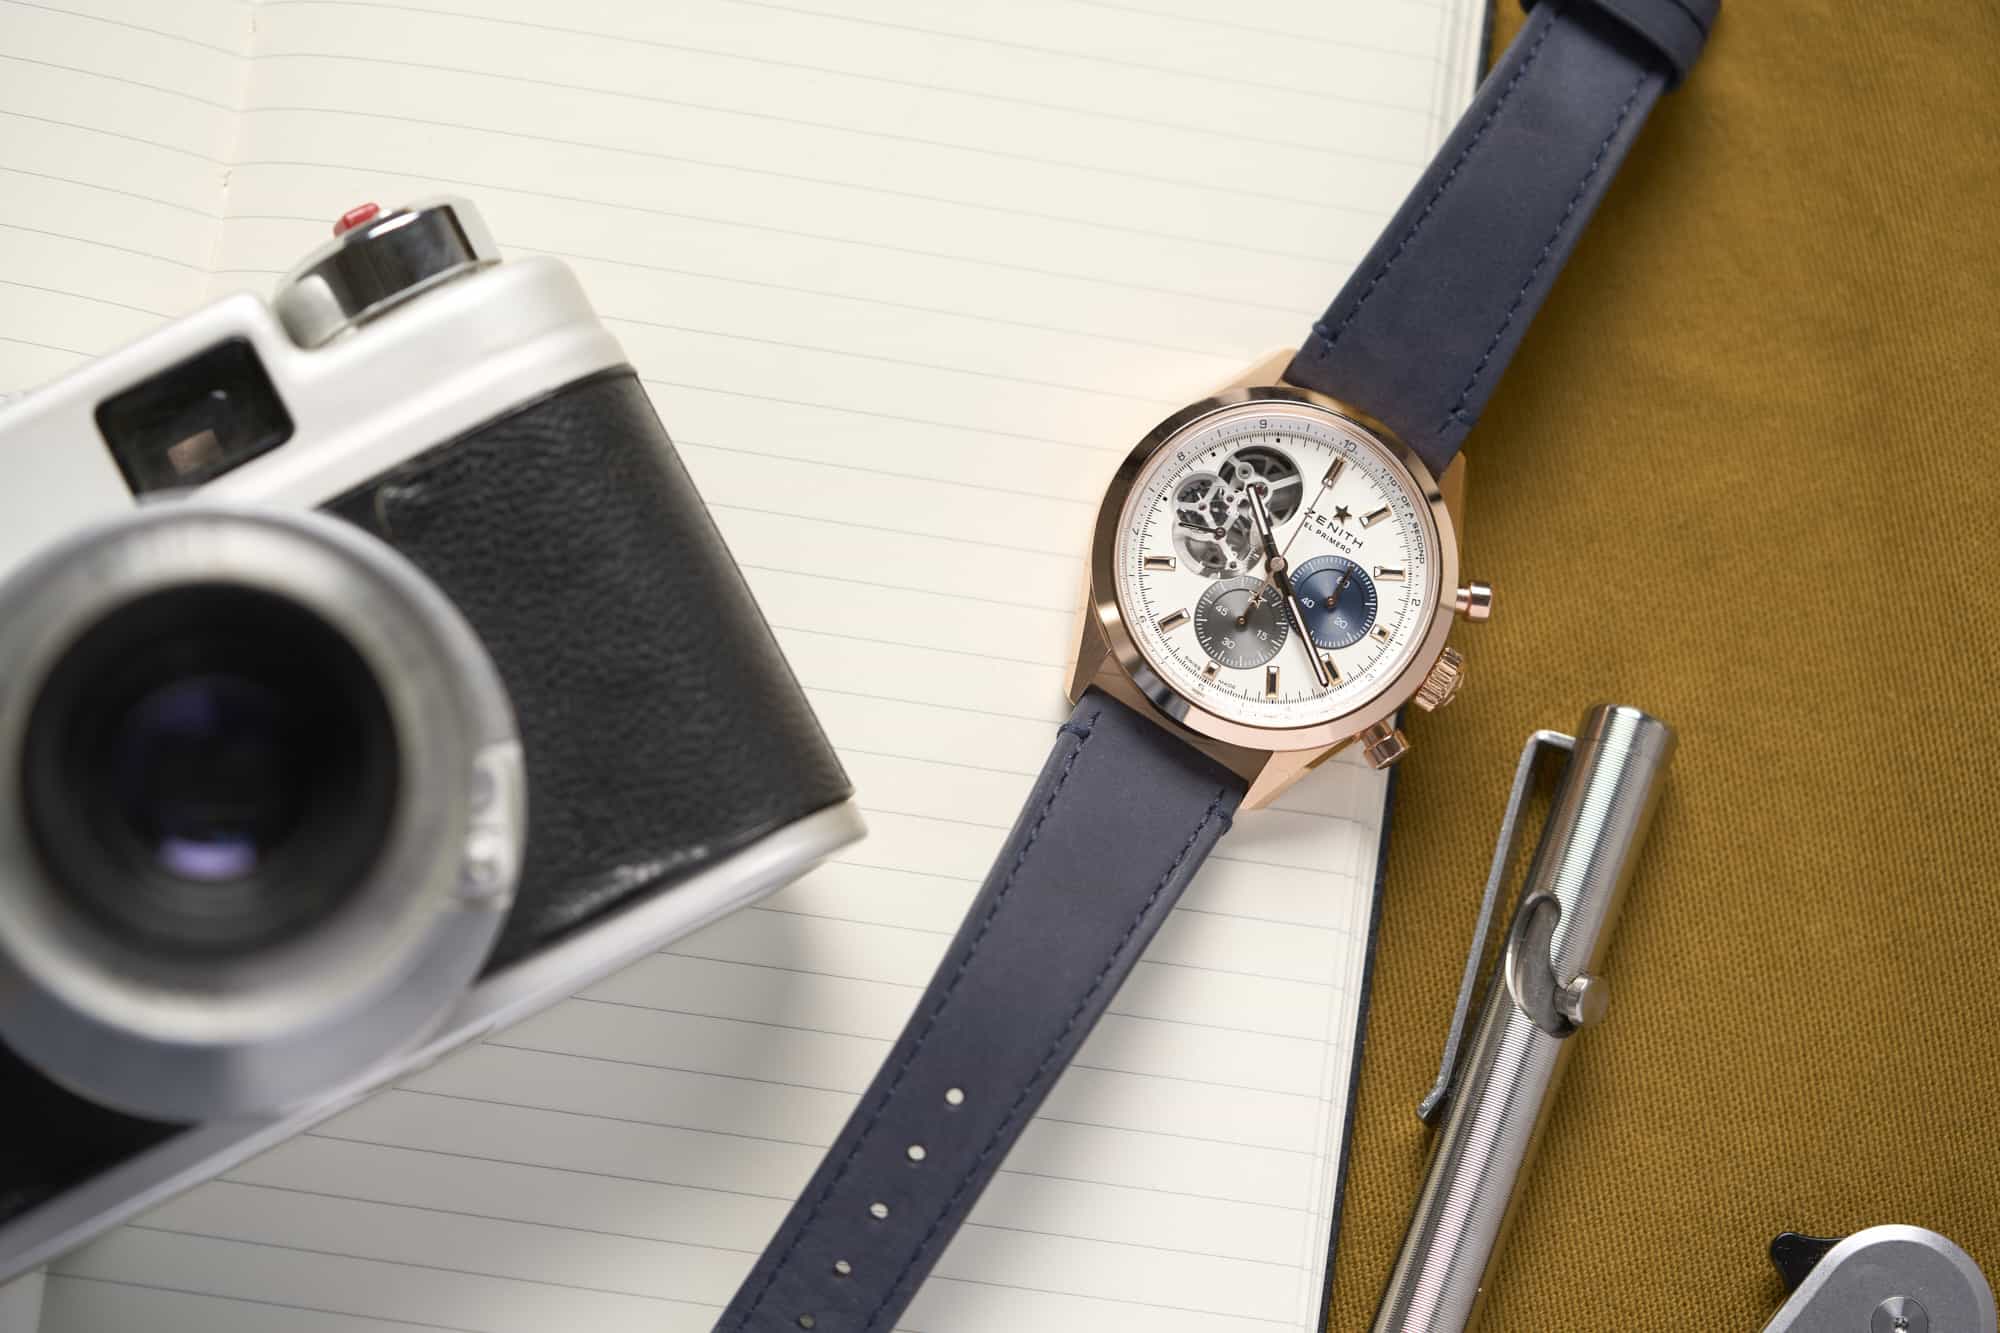 W&W2022: Zenith Chronomaster Sport in Rosegold And New Chronomaster Open